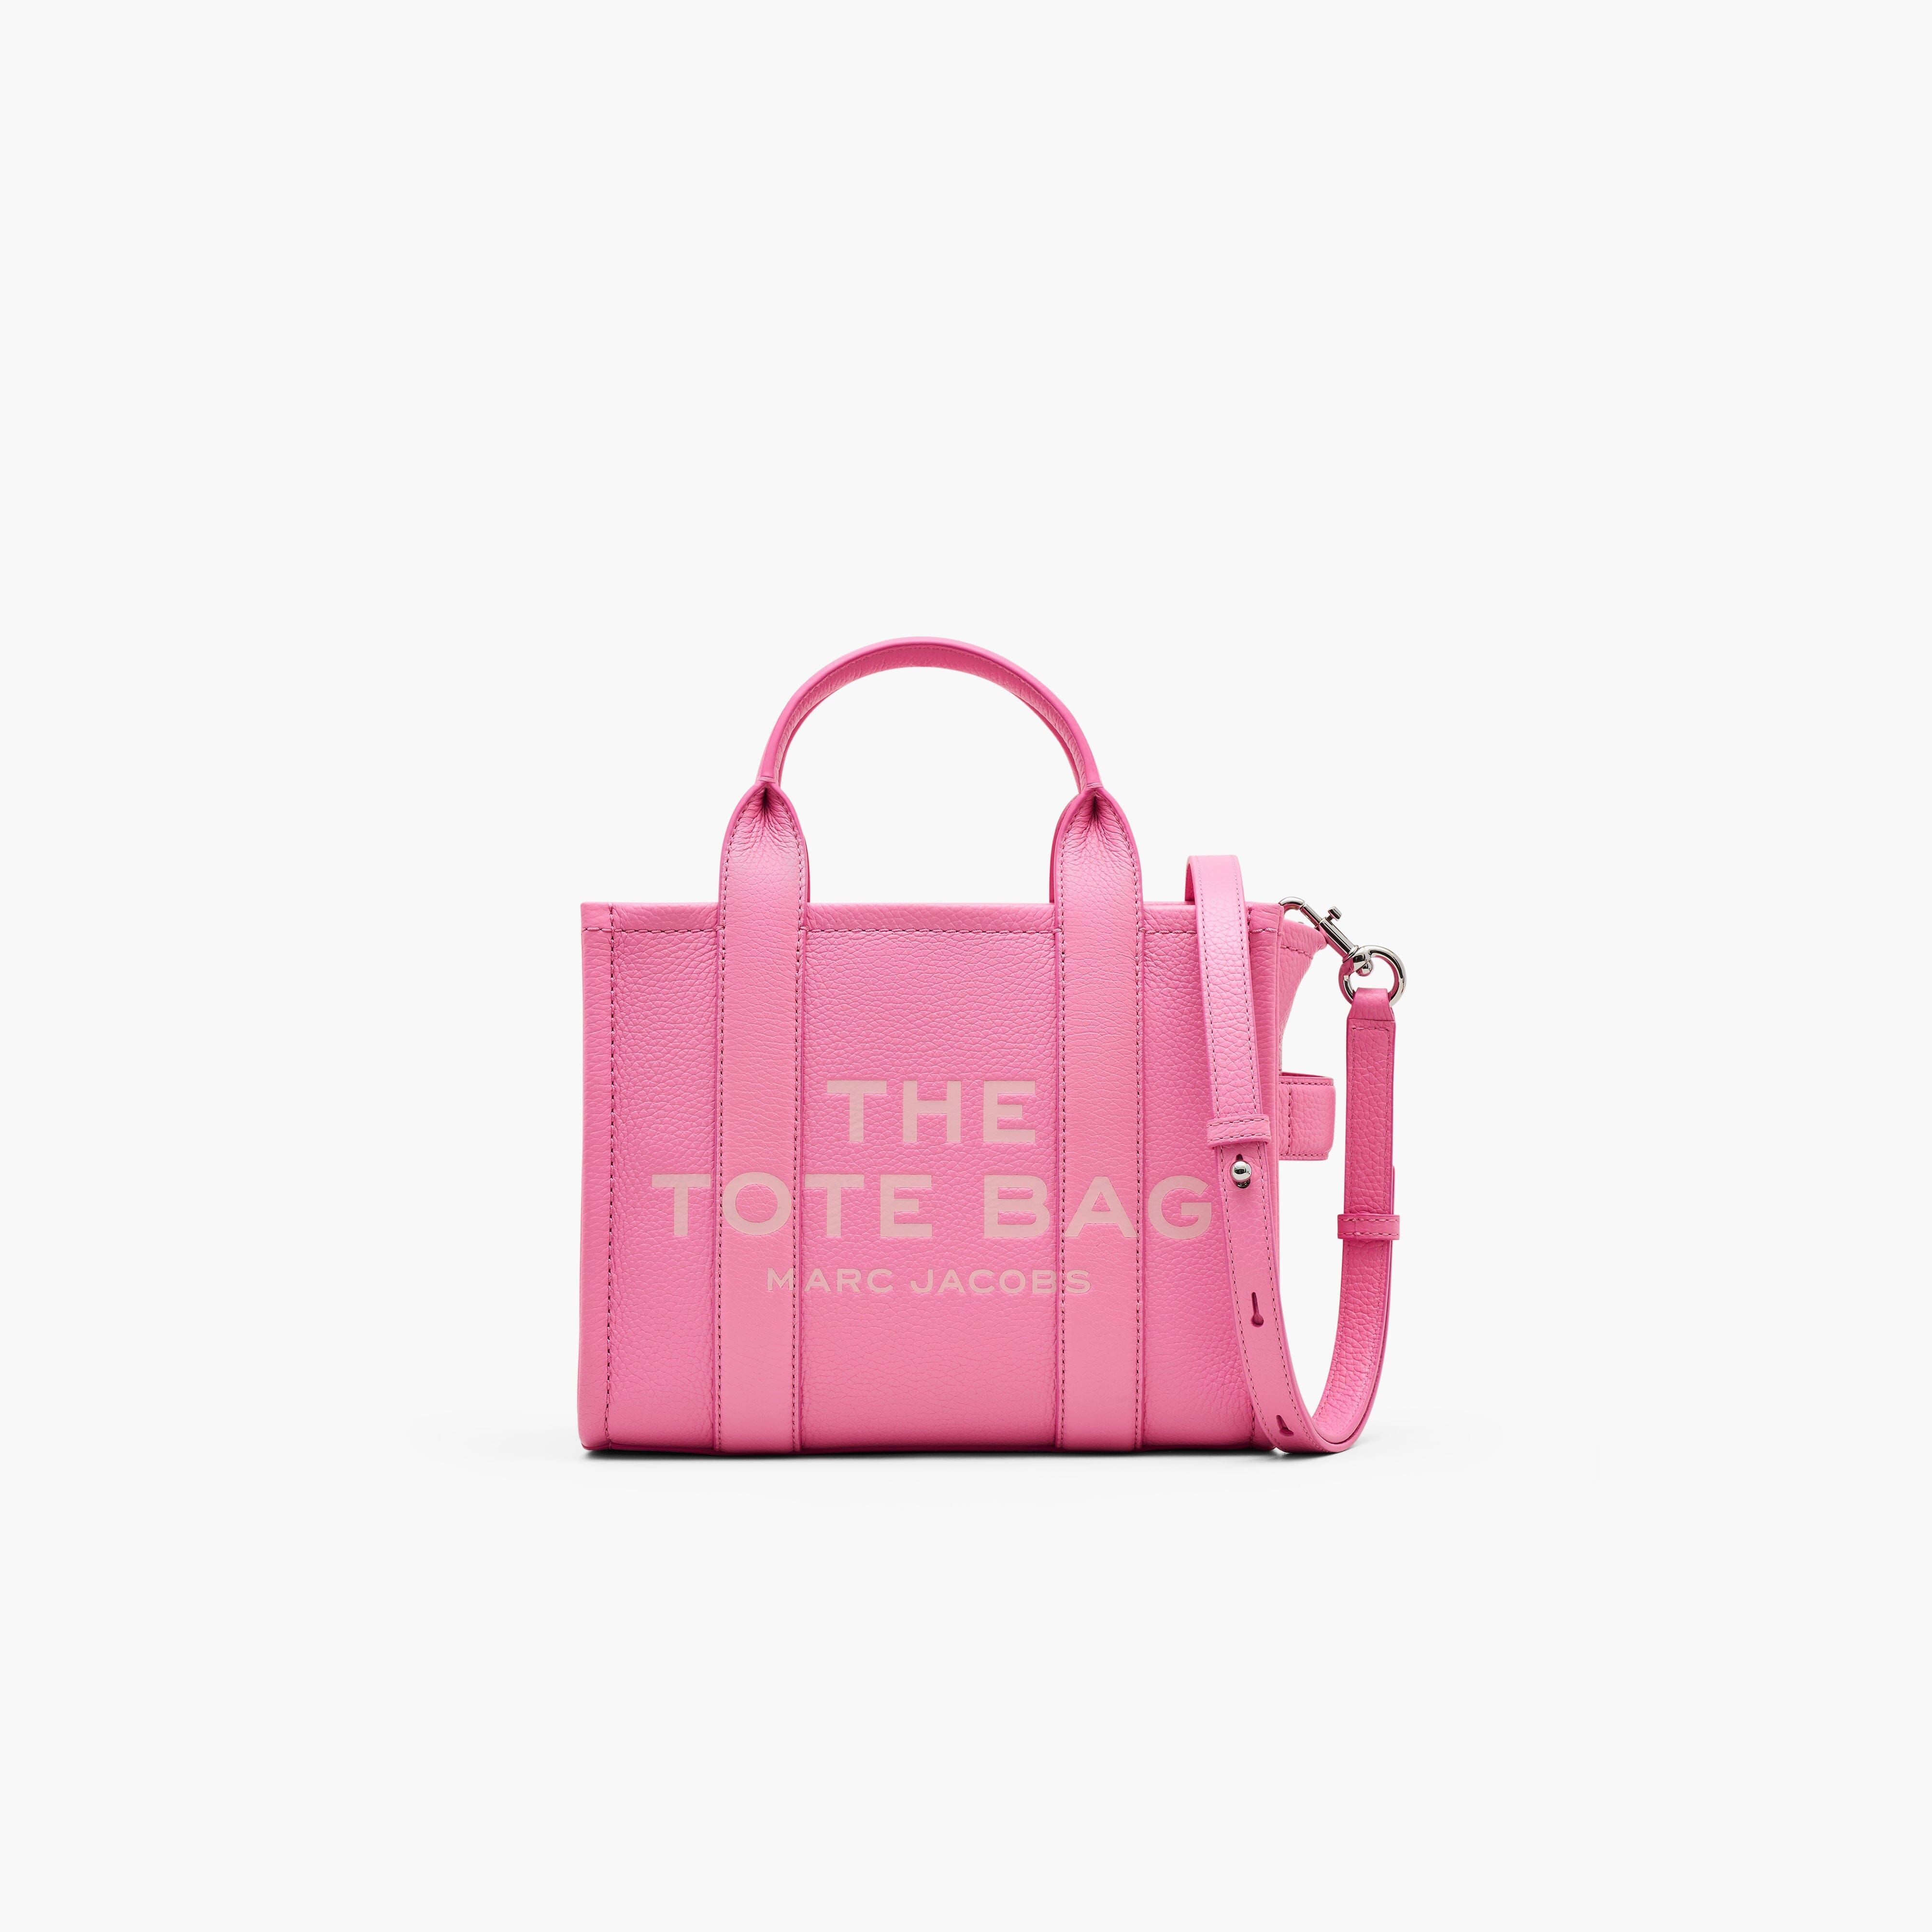 MARC JACOBS - H009L01SP21-666 - The Leather Small Tote Bag - Petal Pink Borse Marc Jacobs 